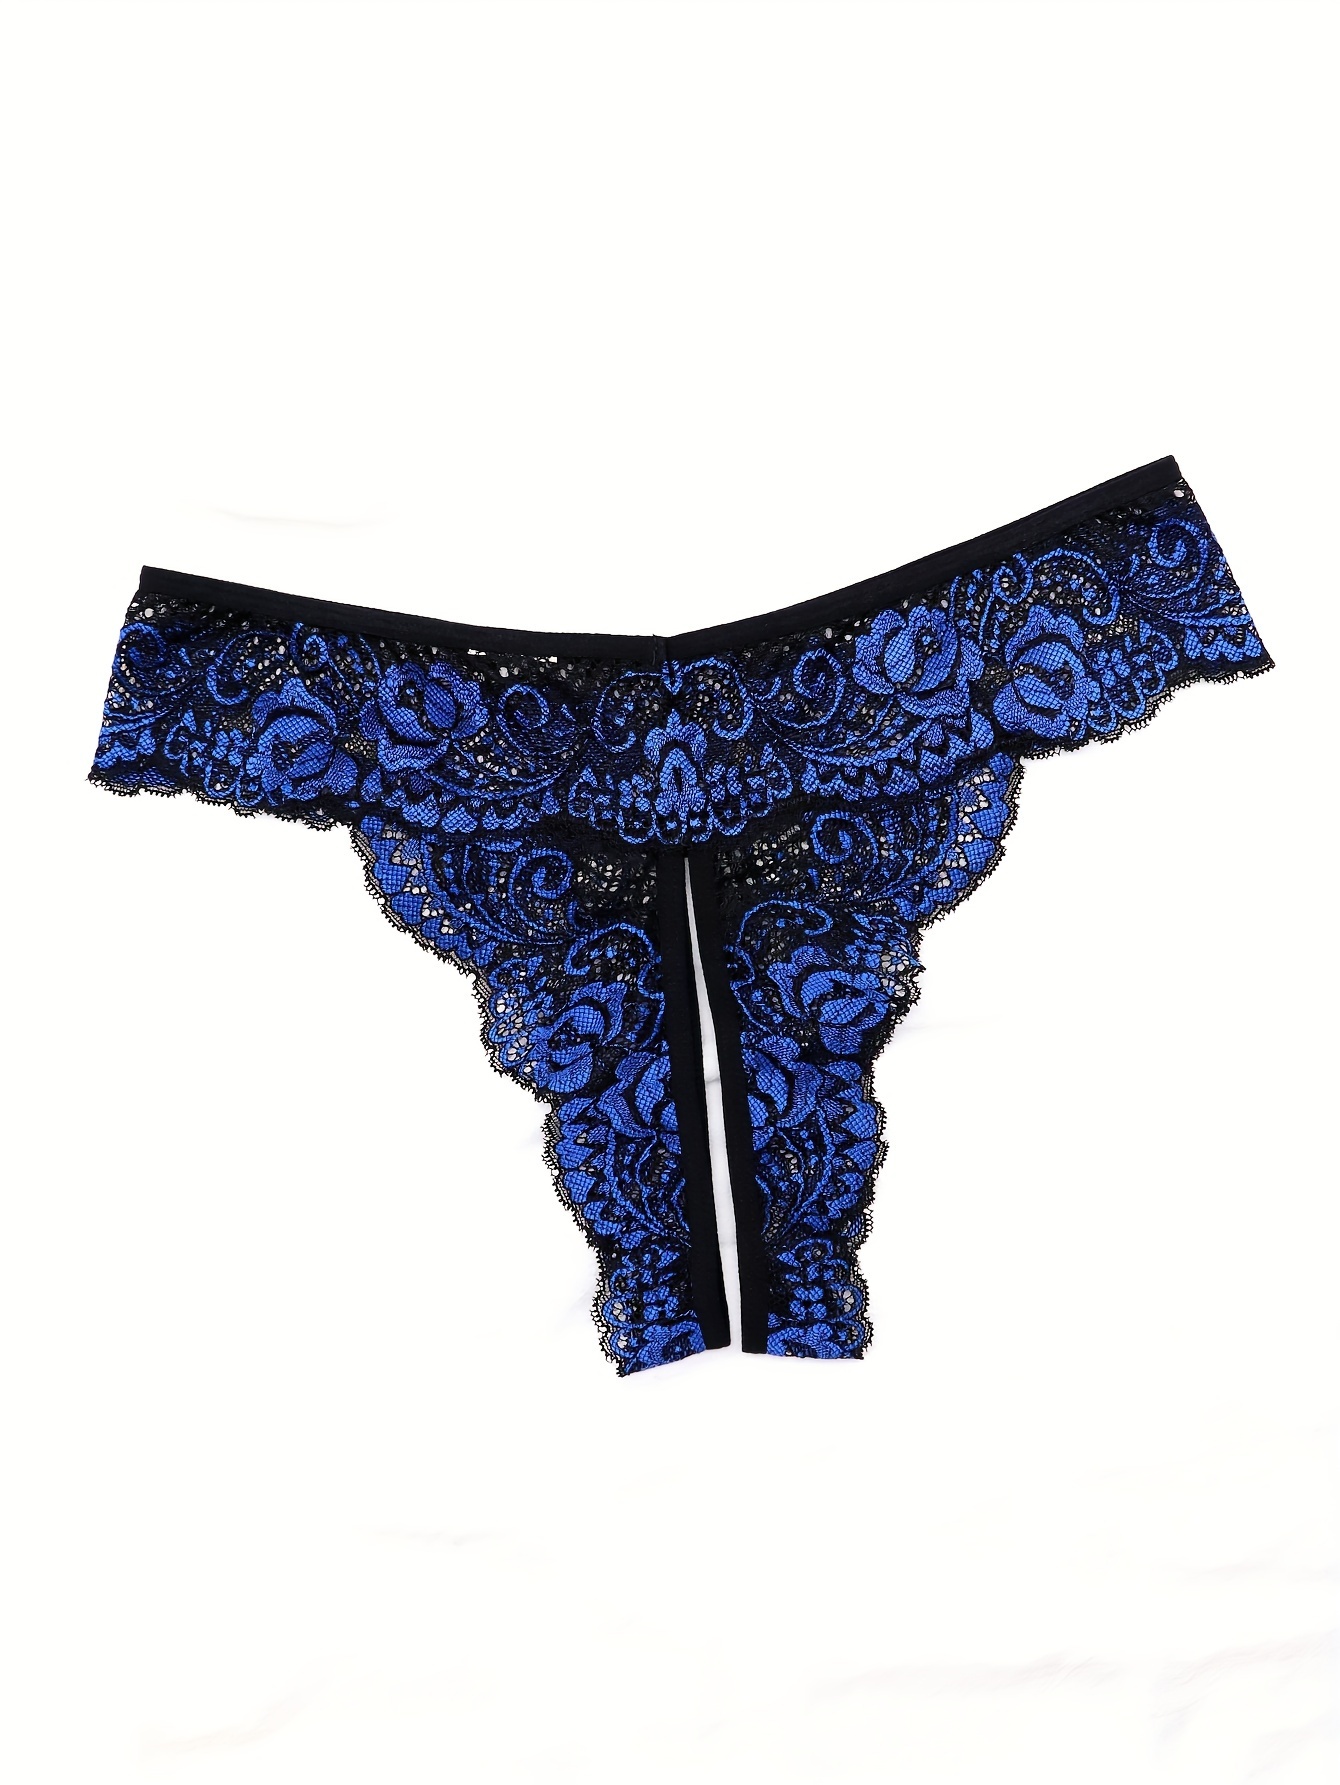 Women's Sexy Briefs Thongs G-String Open Crotch Panties Lace Underwear  Lingerie